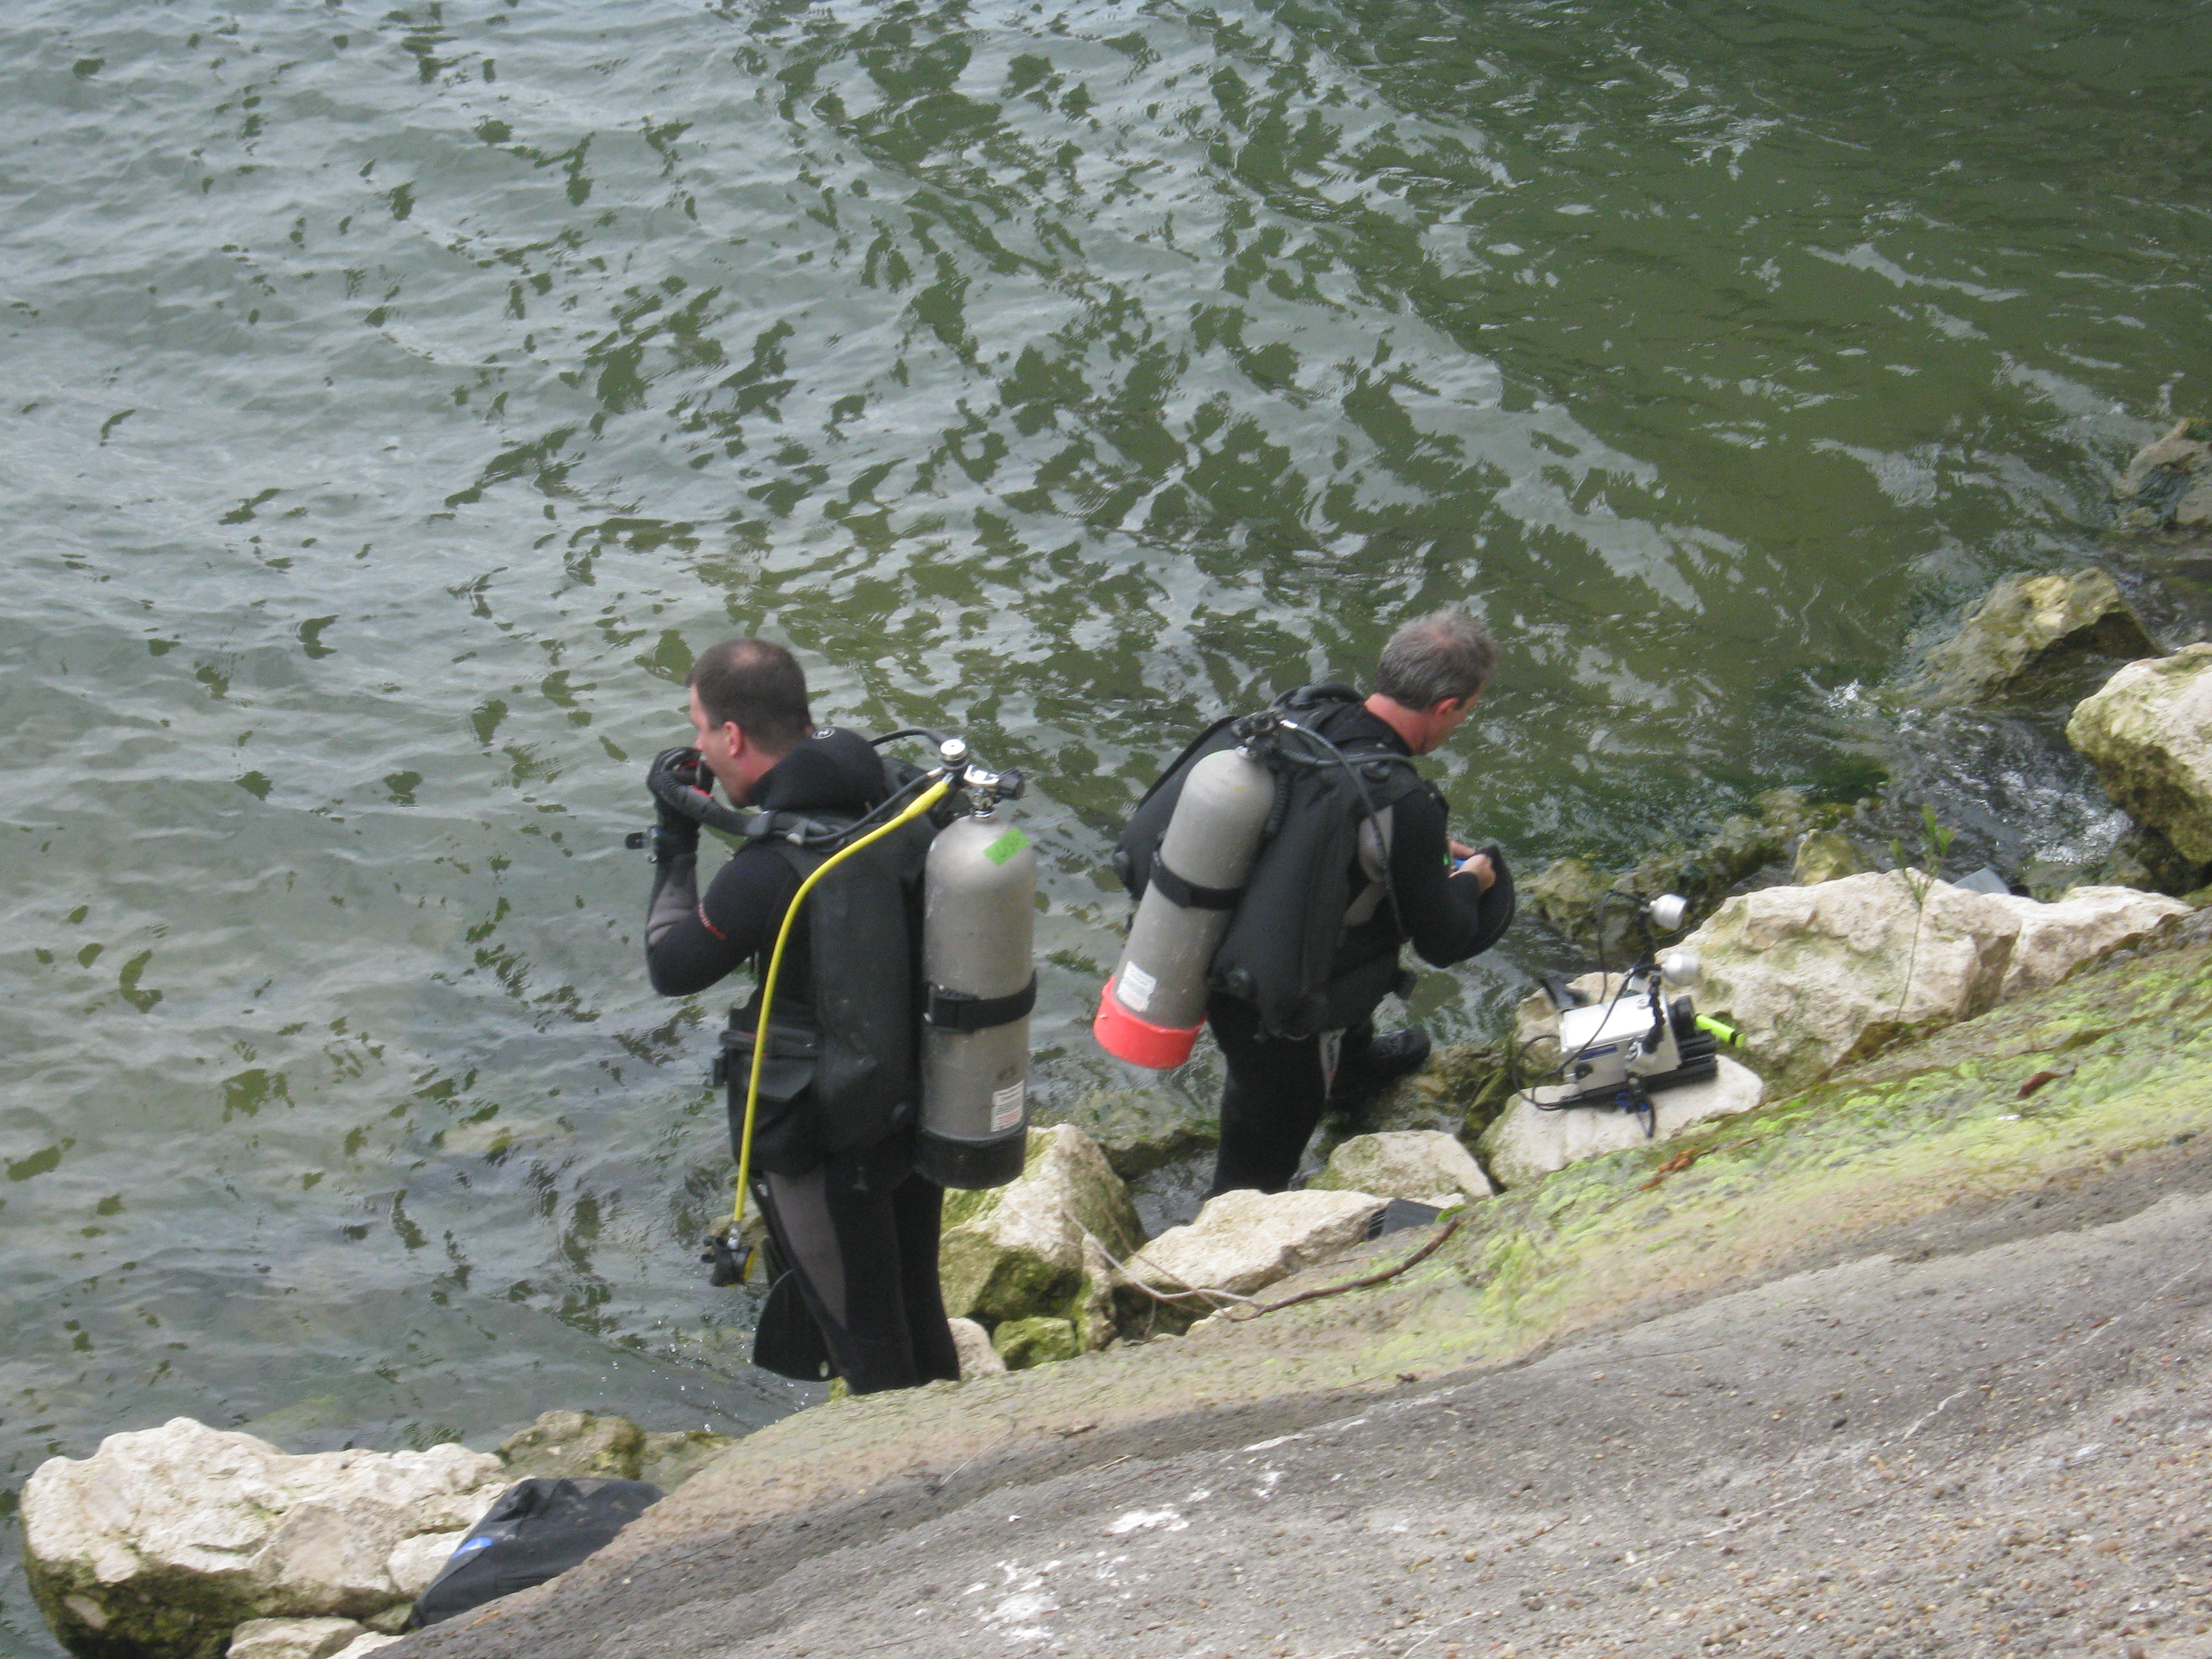 Two scuba divers, standing in the water along the rocky lake edge, putting on their dive masks